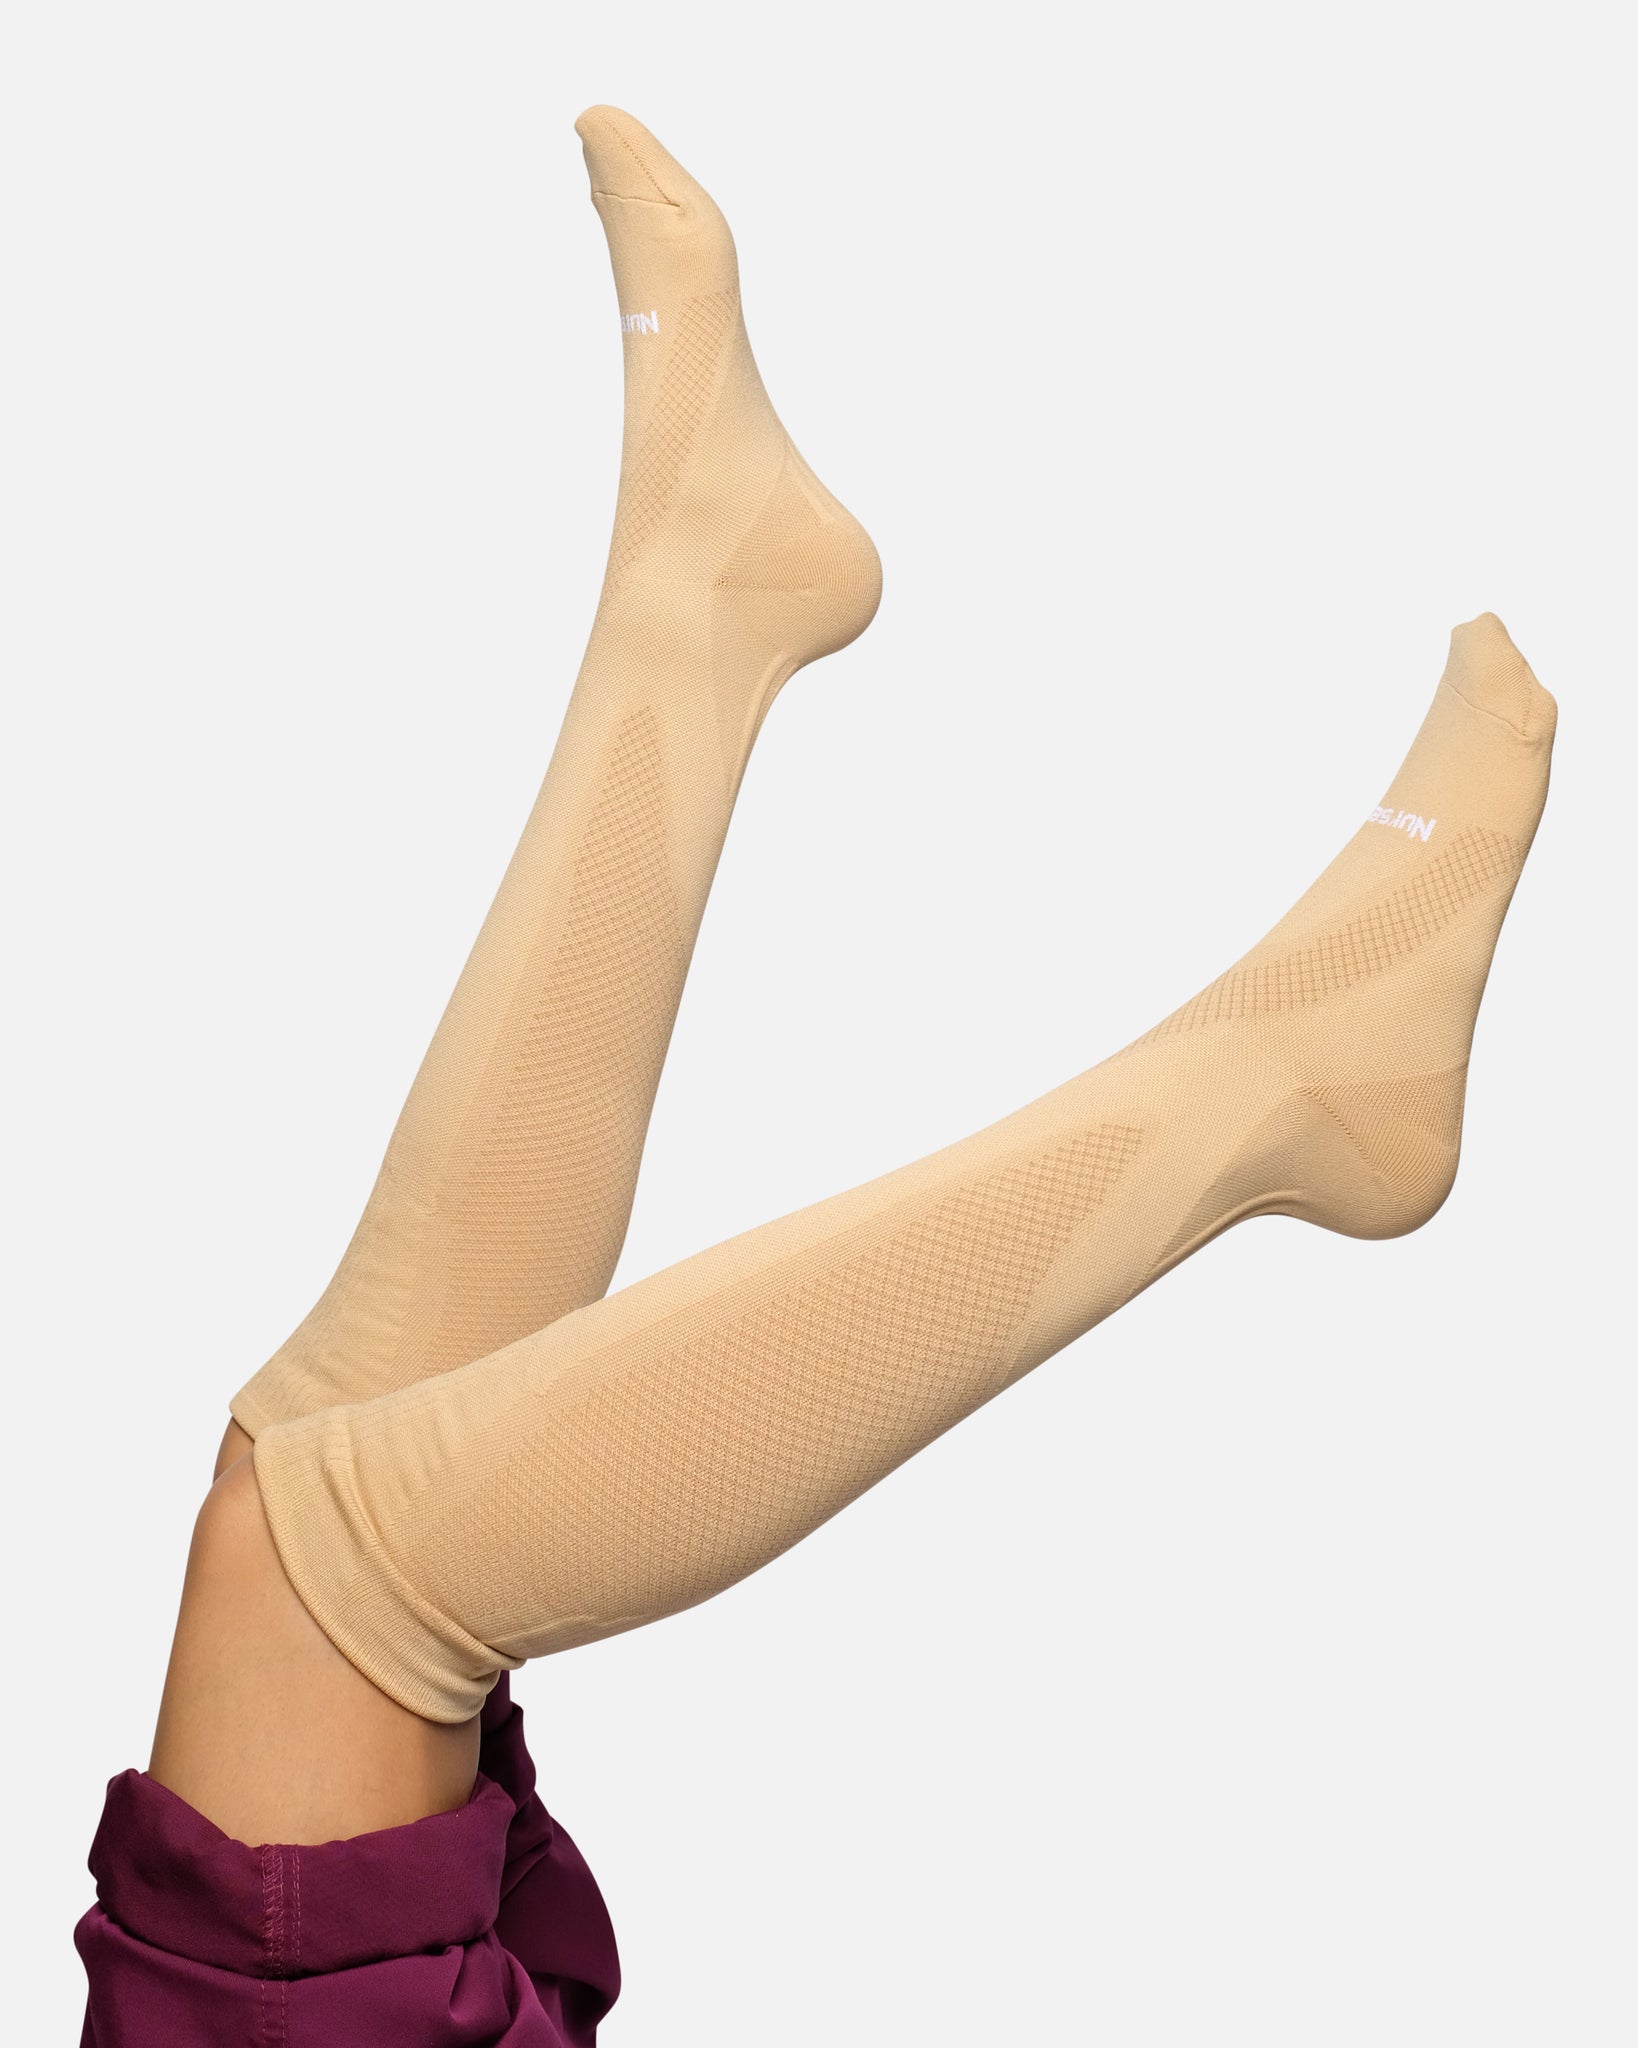 Compression stockings during pregnancy